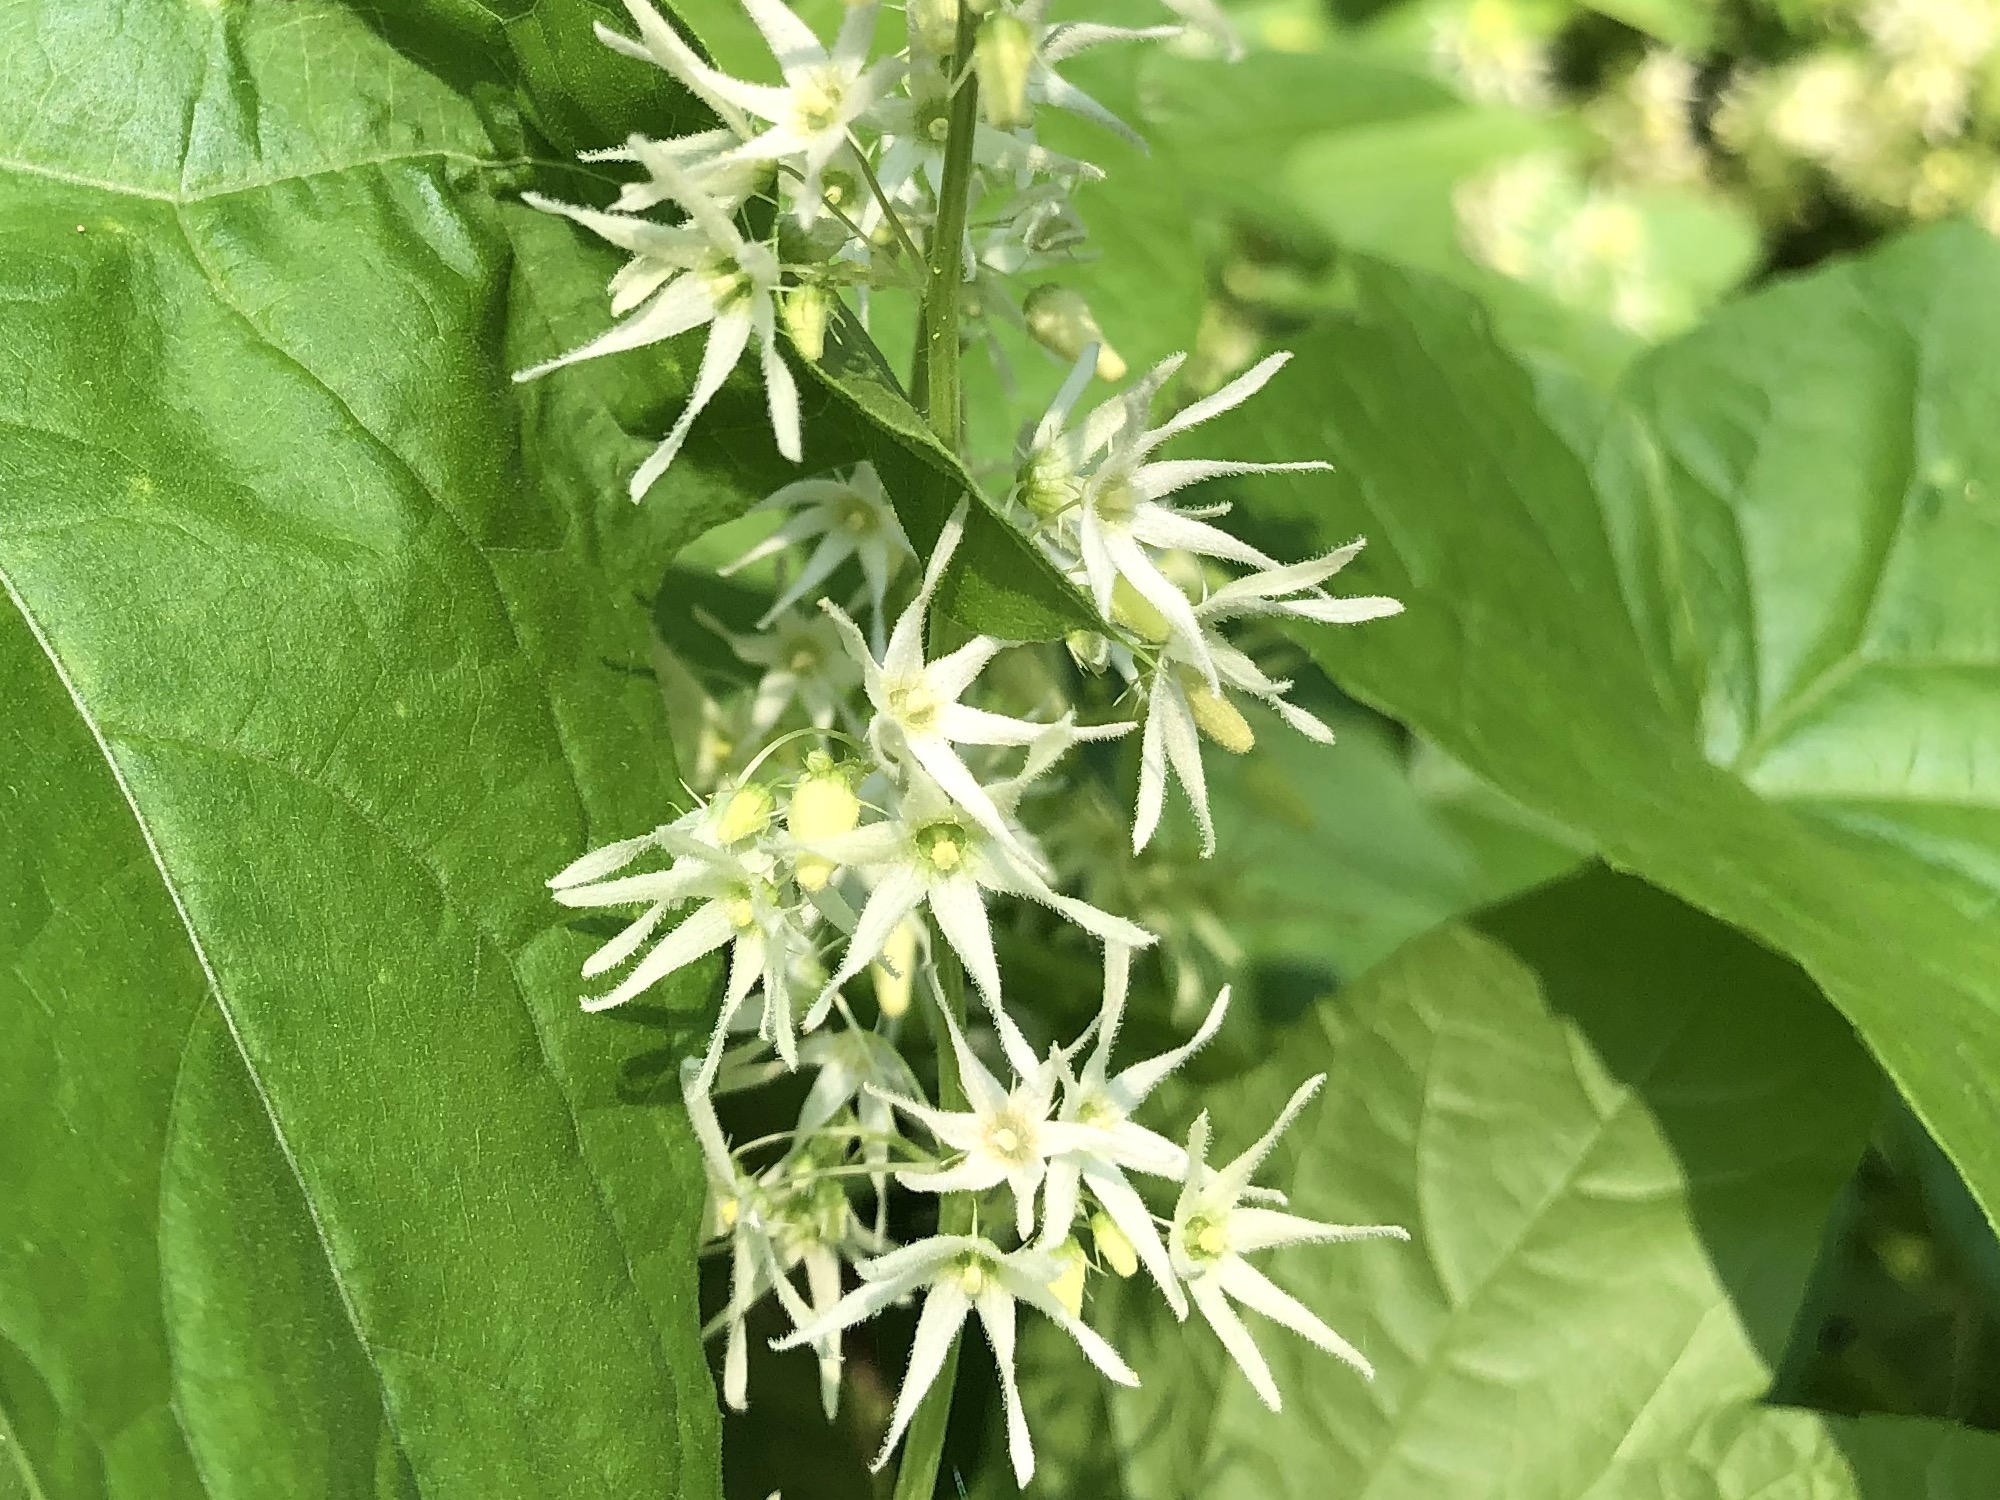 Wild Cucumber at edge of woods on Arbor Drive in Madison, Wisconsin on August 22, 2019.